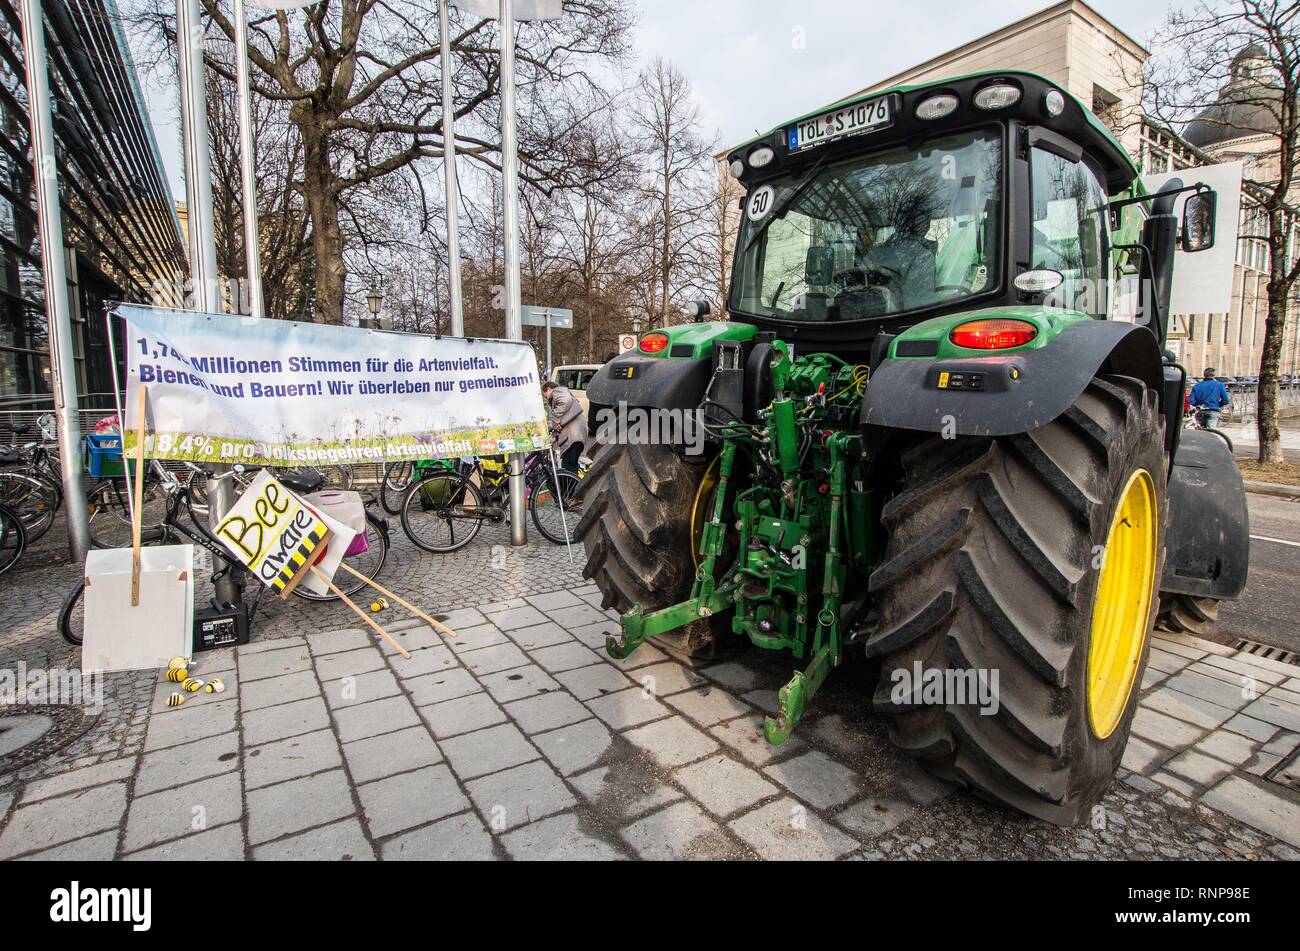 Munich, Bavaria, Germany. 20th Feb, 2019. After being deemed the most successful citizen initiative in the history of Bavaria with over 1.7 million signatures collected representing 18.4% of Bavaria, the groups behind the Volksbegehren Artenvielfalt, aka Save the Bees and Citizens' Initiative Species Diversity continue their work towards entering the initiative into law. The Save the Bees initiative is designed to put measures into place to not only prevent die offs of bees, but of various species throughout Bavaria, with the actors hoping Bavaria becomes an example for other regions w Stock Photo